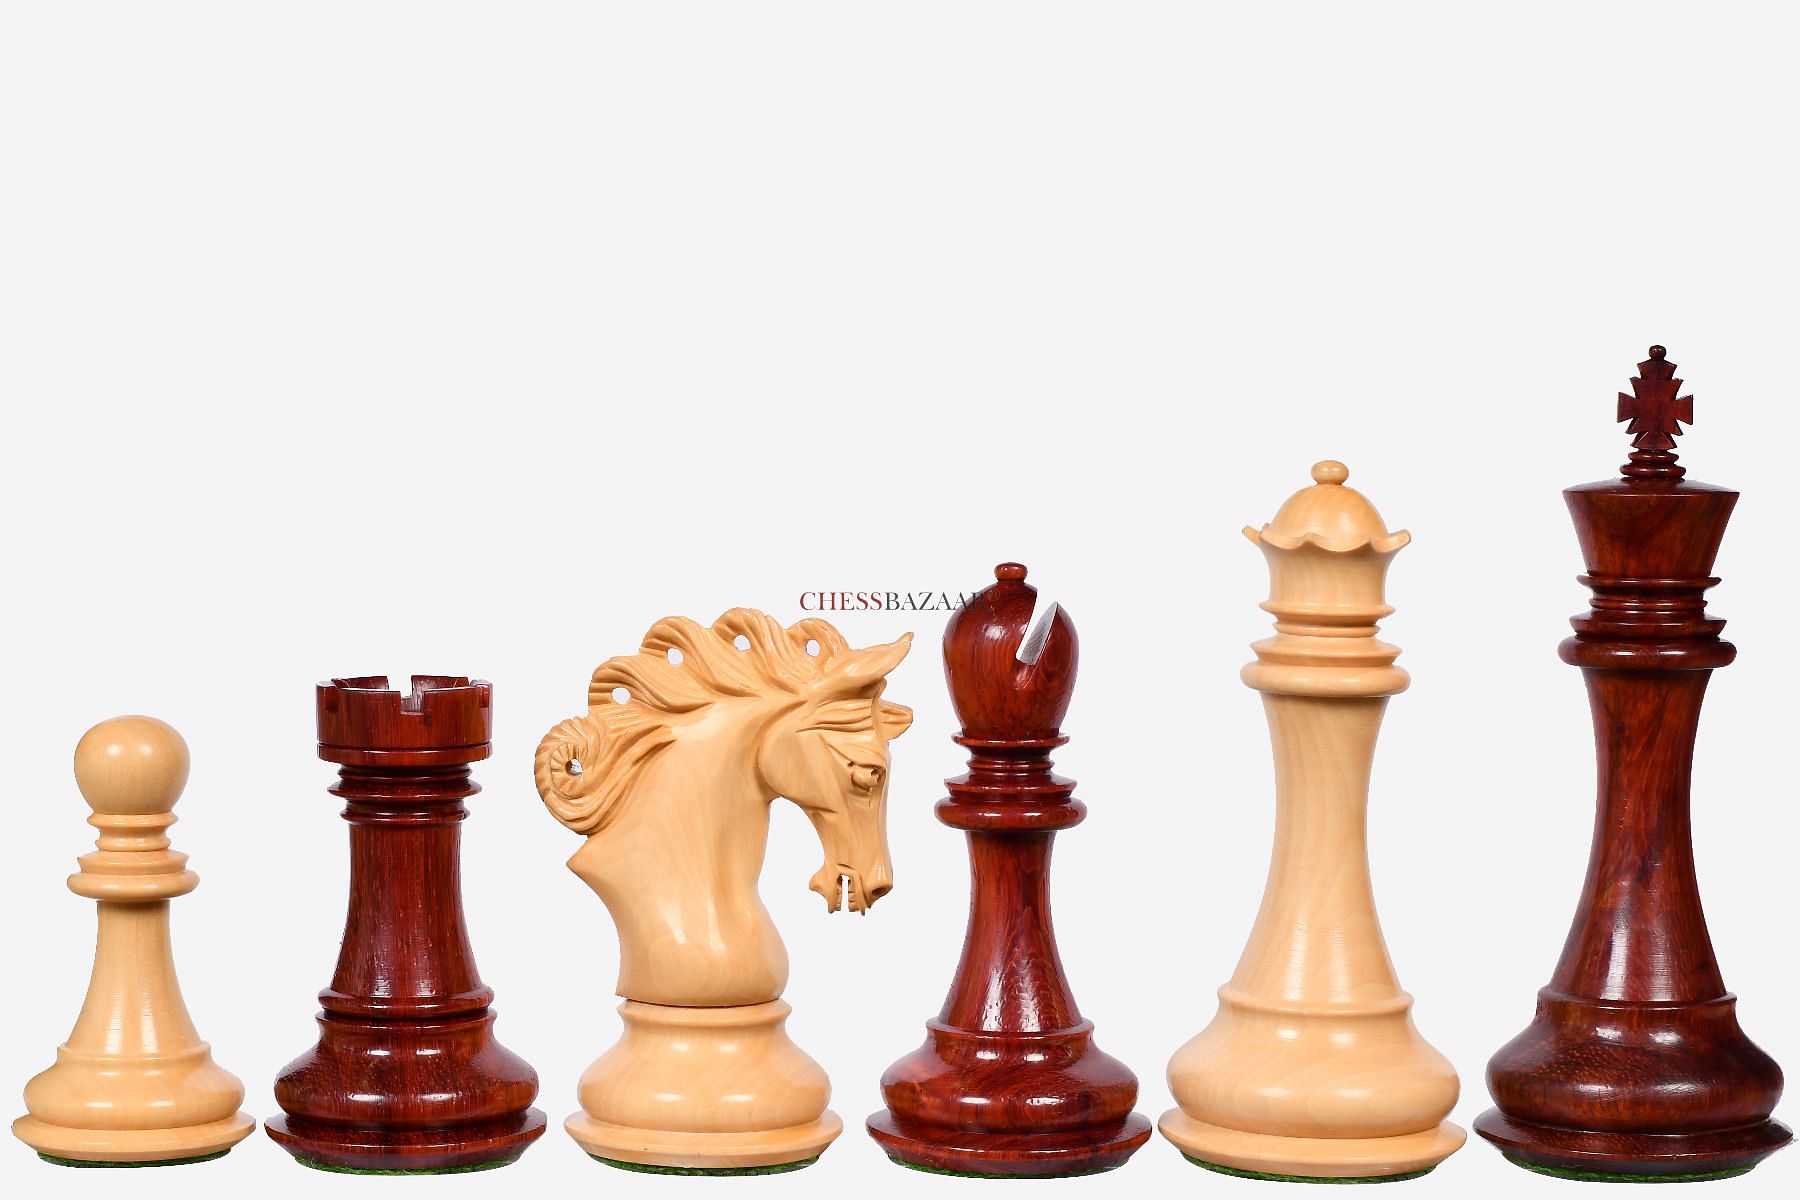 Buy Best Chess Set - Wooden Chess Set for Sale in Bud Rose & Box Wood